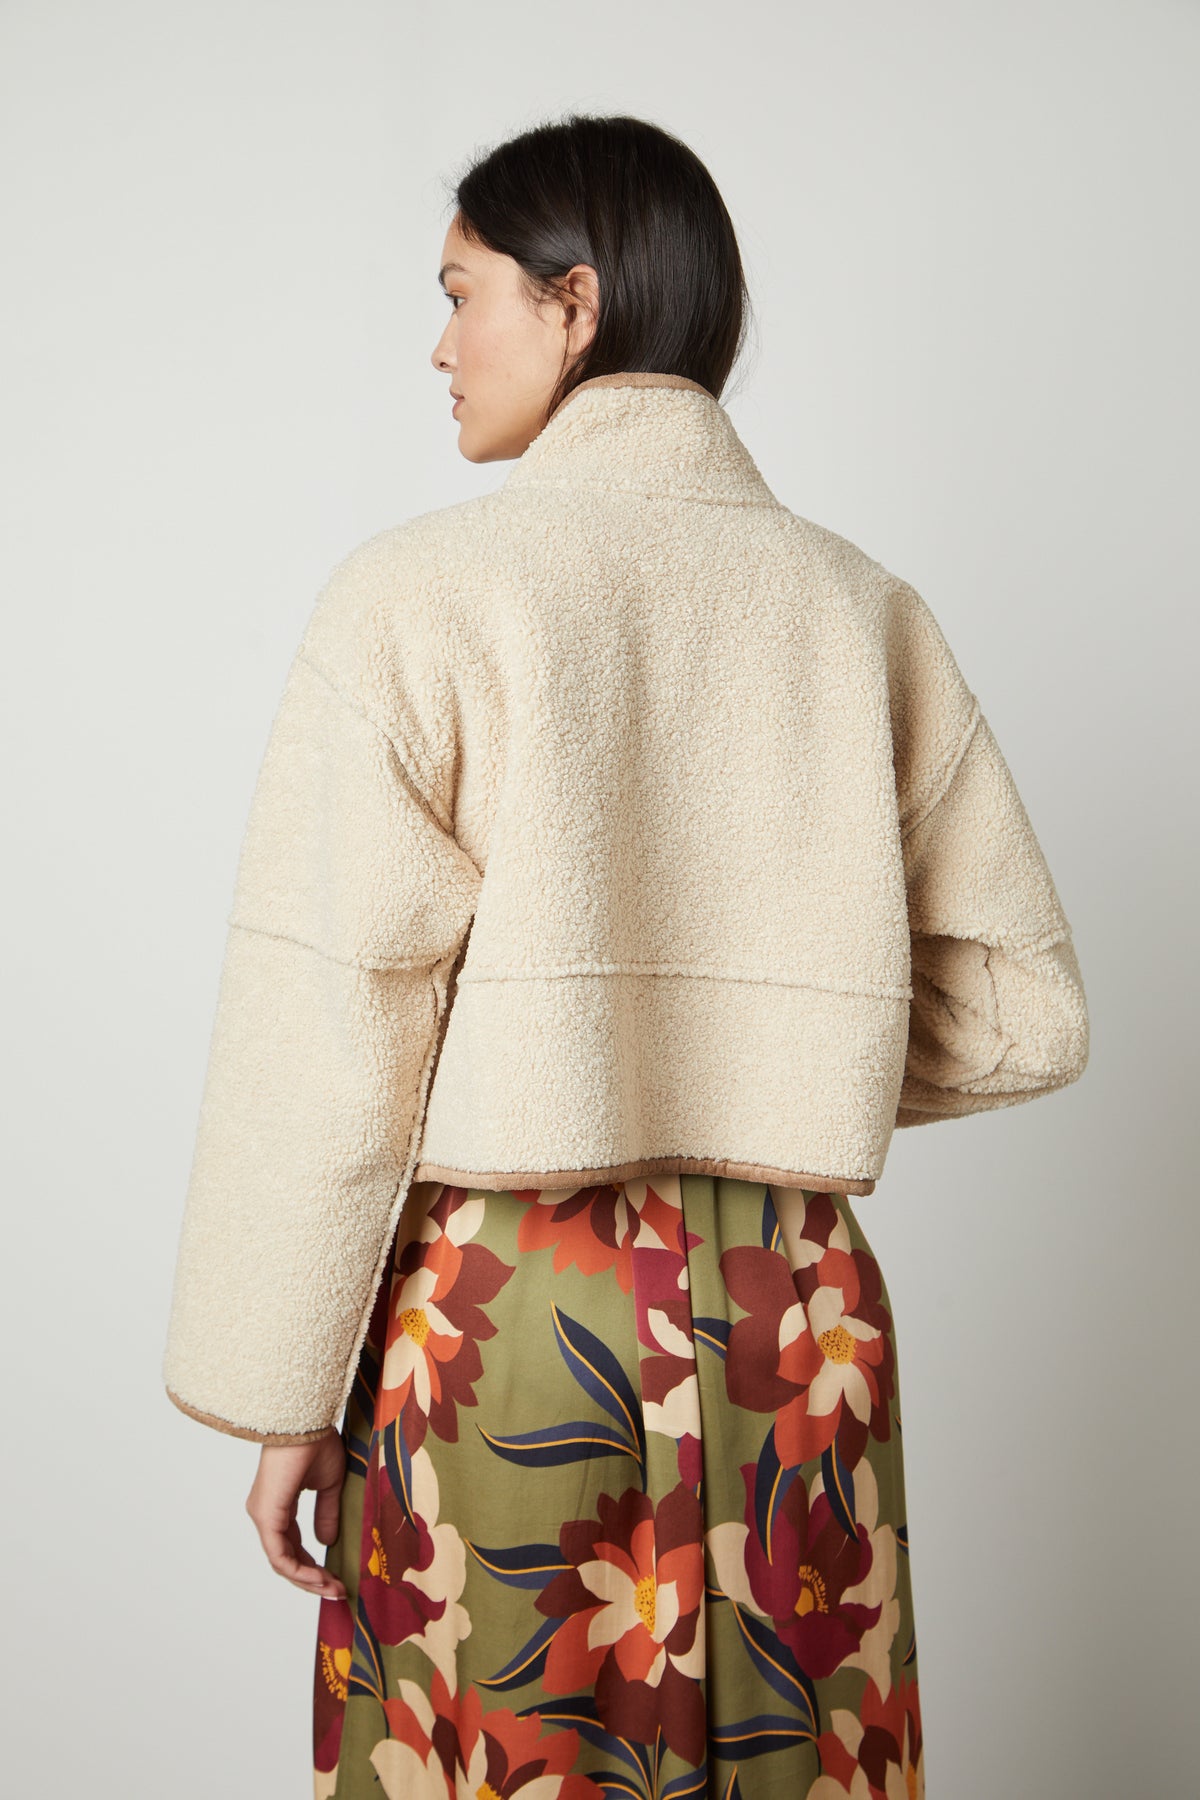 The back view of a person wearing a Velvet by Graham & Spencer KELLY LUX SHERPA REVERSIBLE JACKET and floral skirt.-26910374494401